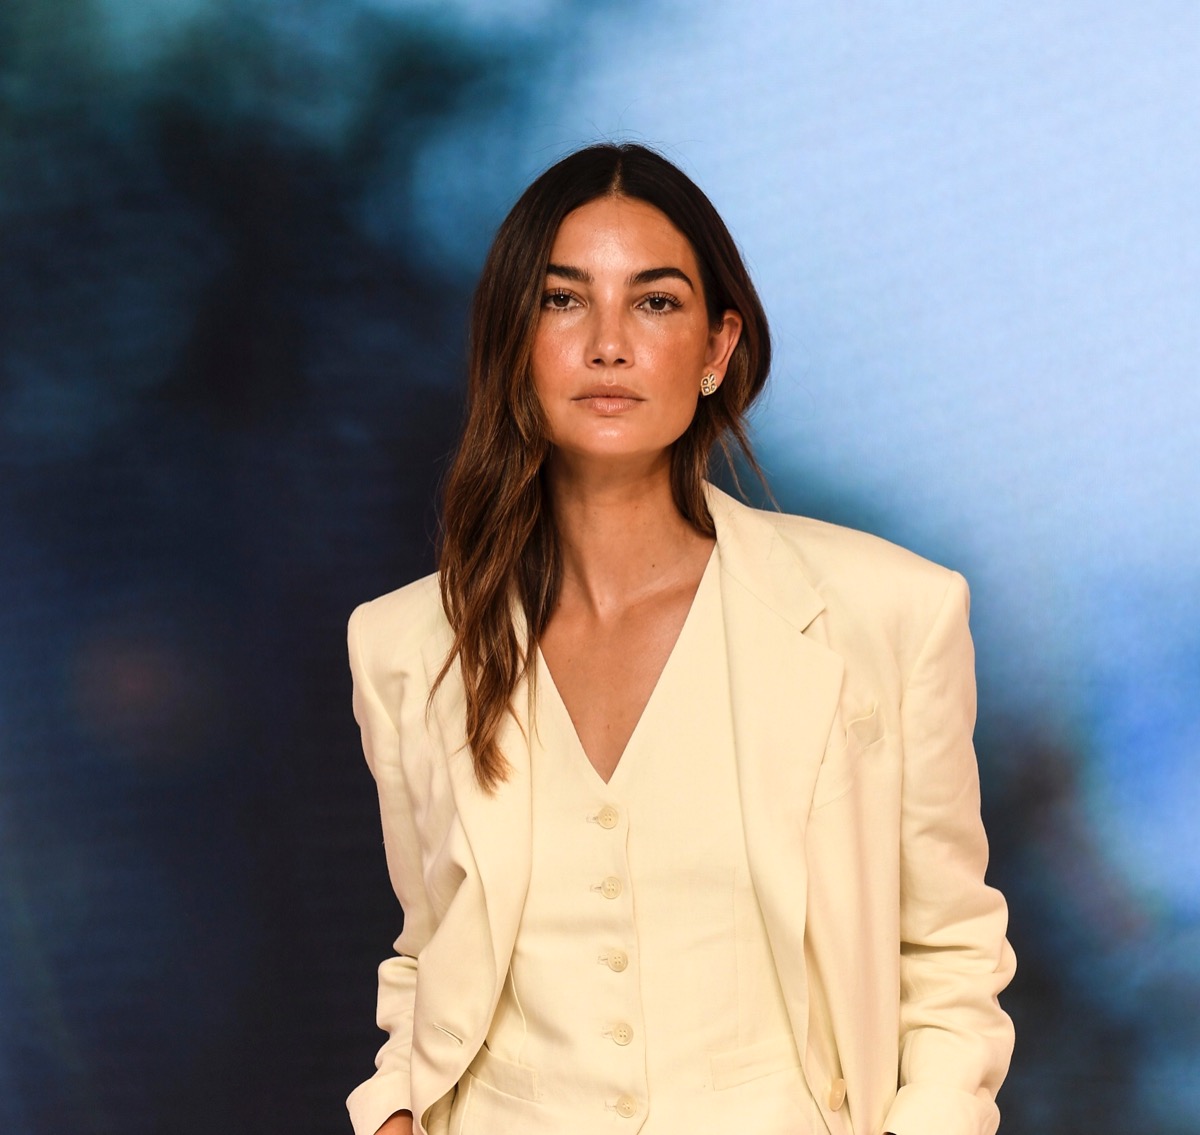 Lily Aldridge: “The World Is Your Oyster